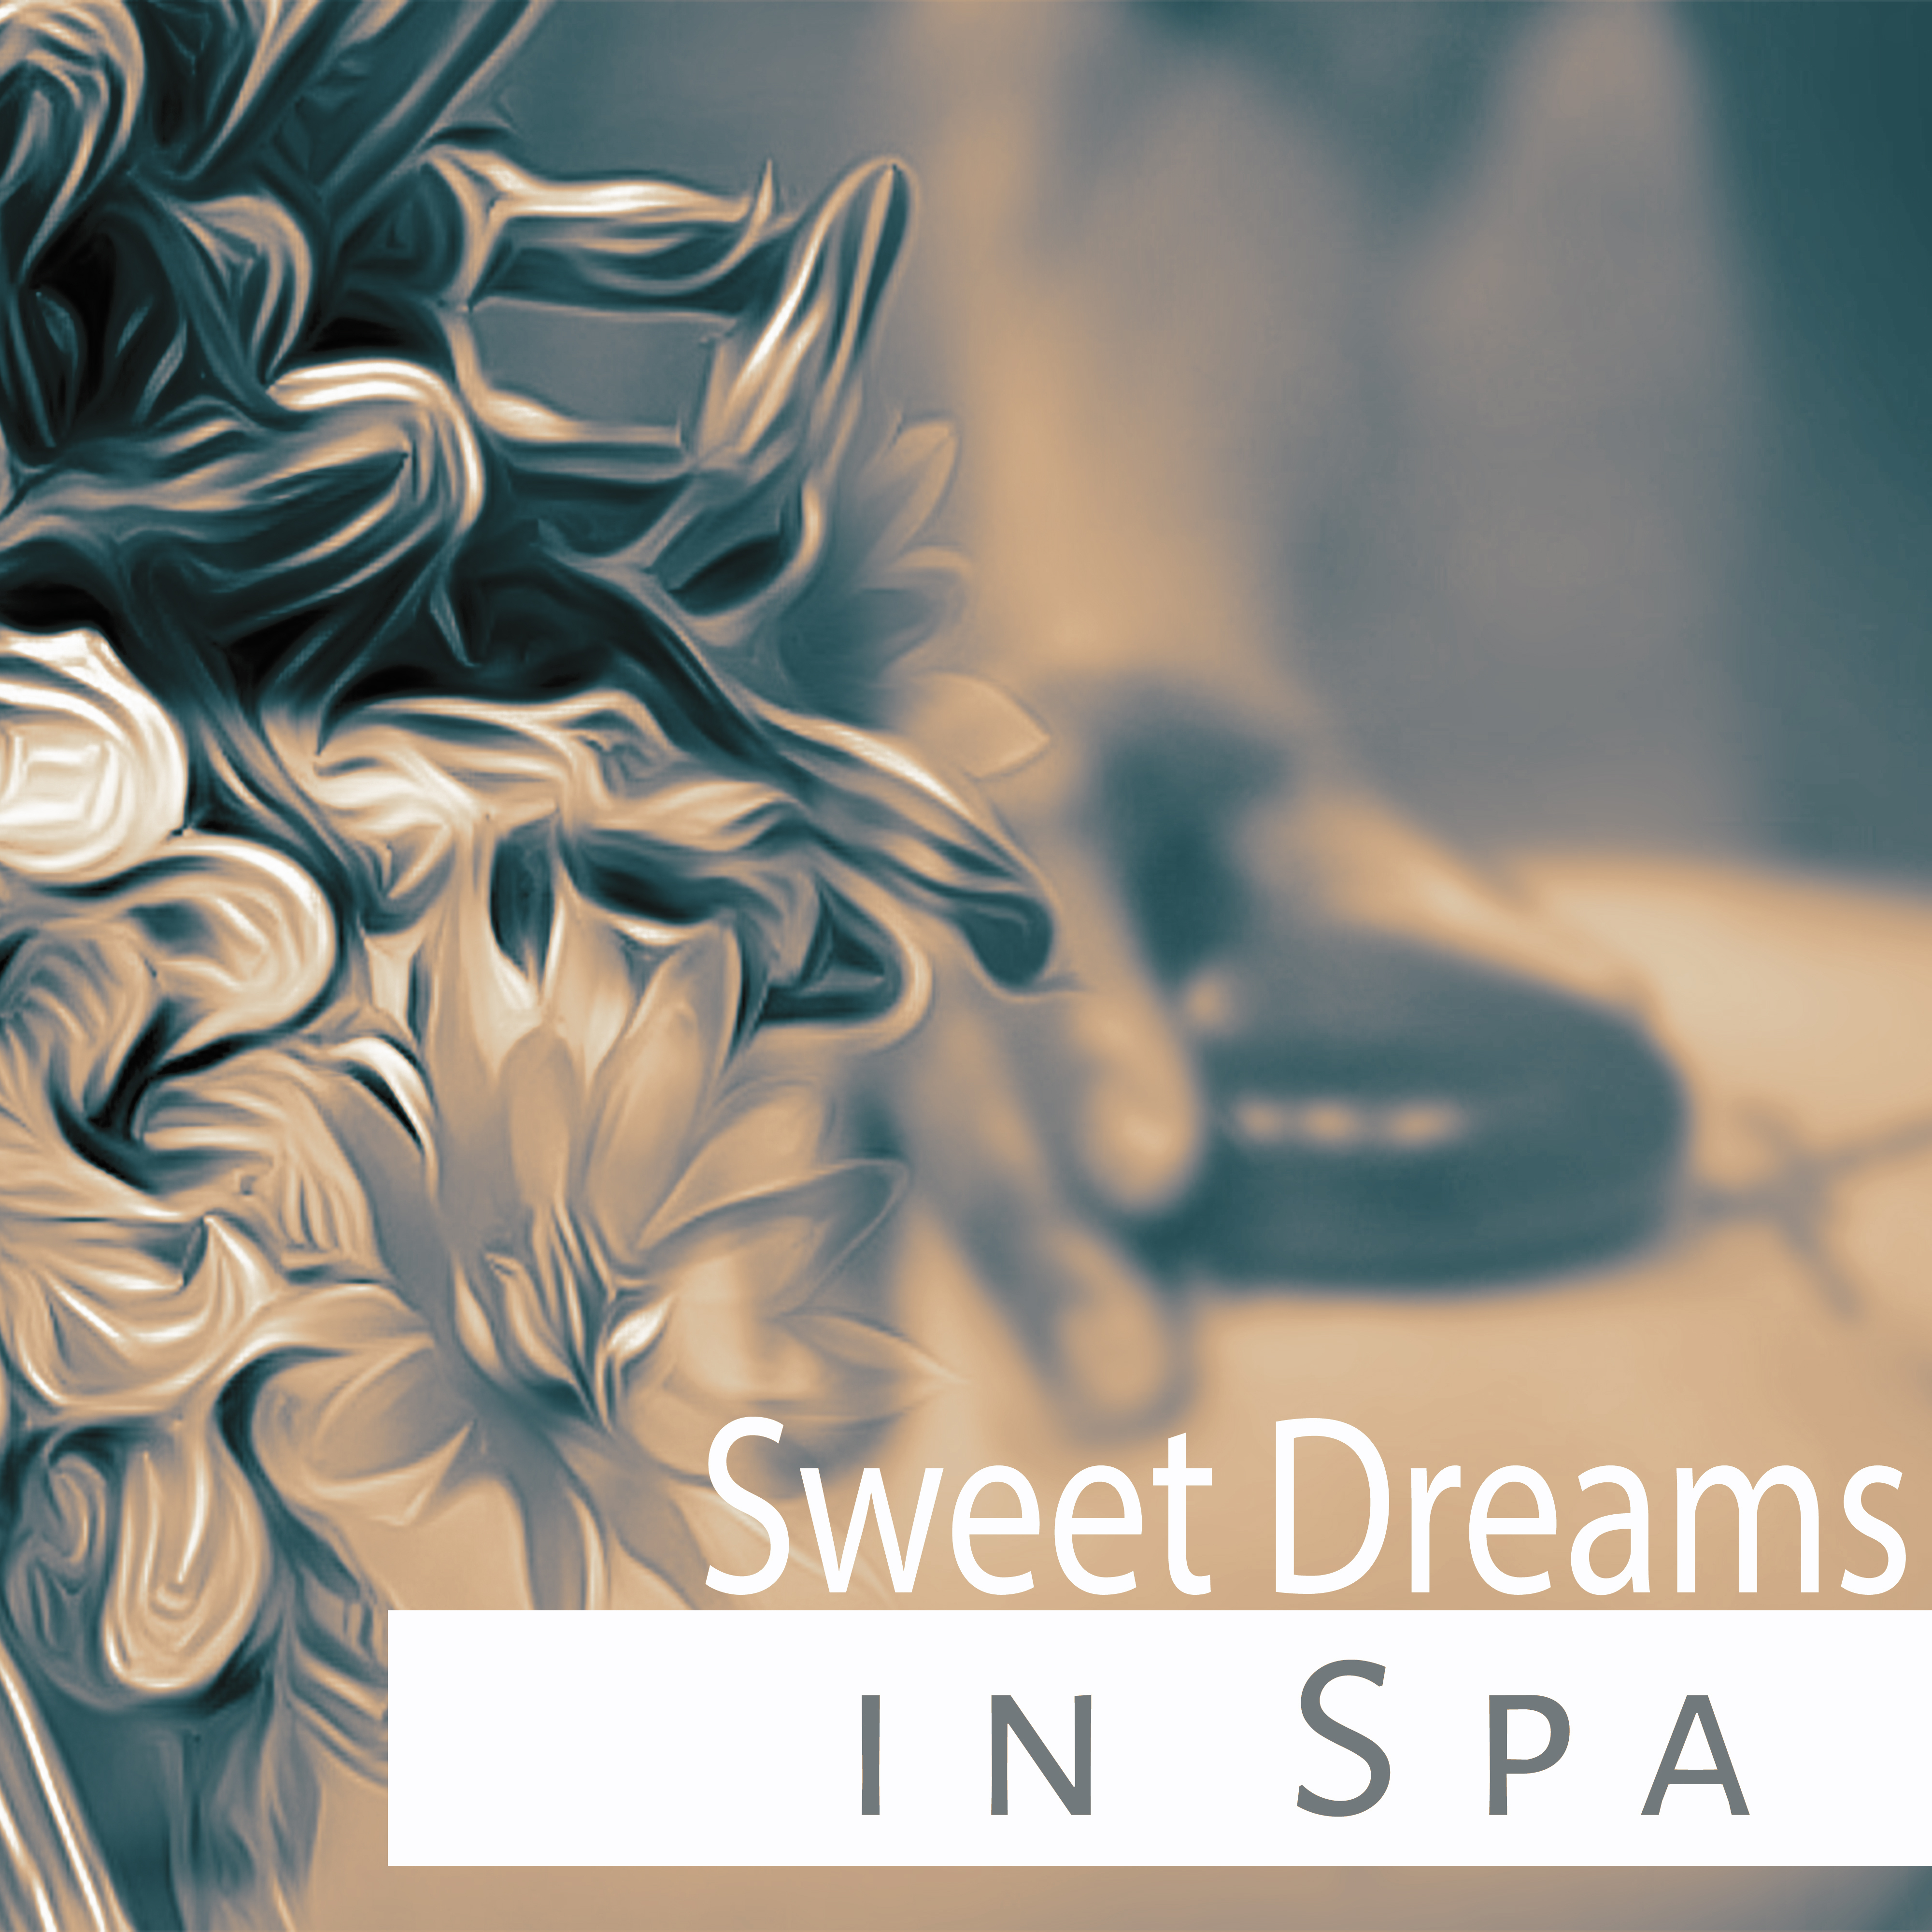 Sweet Dreams in Spa  Relaxation Sounds, Spa Music, Wellness, Deep Sleep, Nature Sounds, Sea Waves, Zen Spa, Peaceful Music